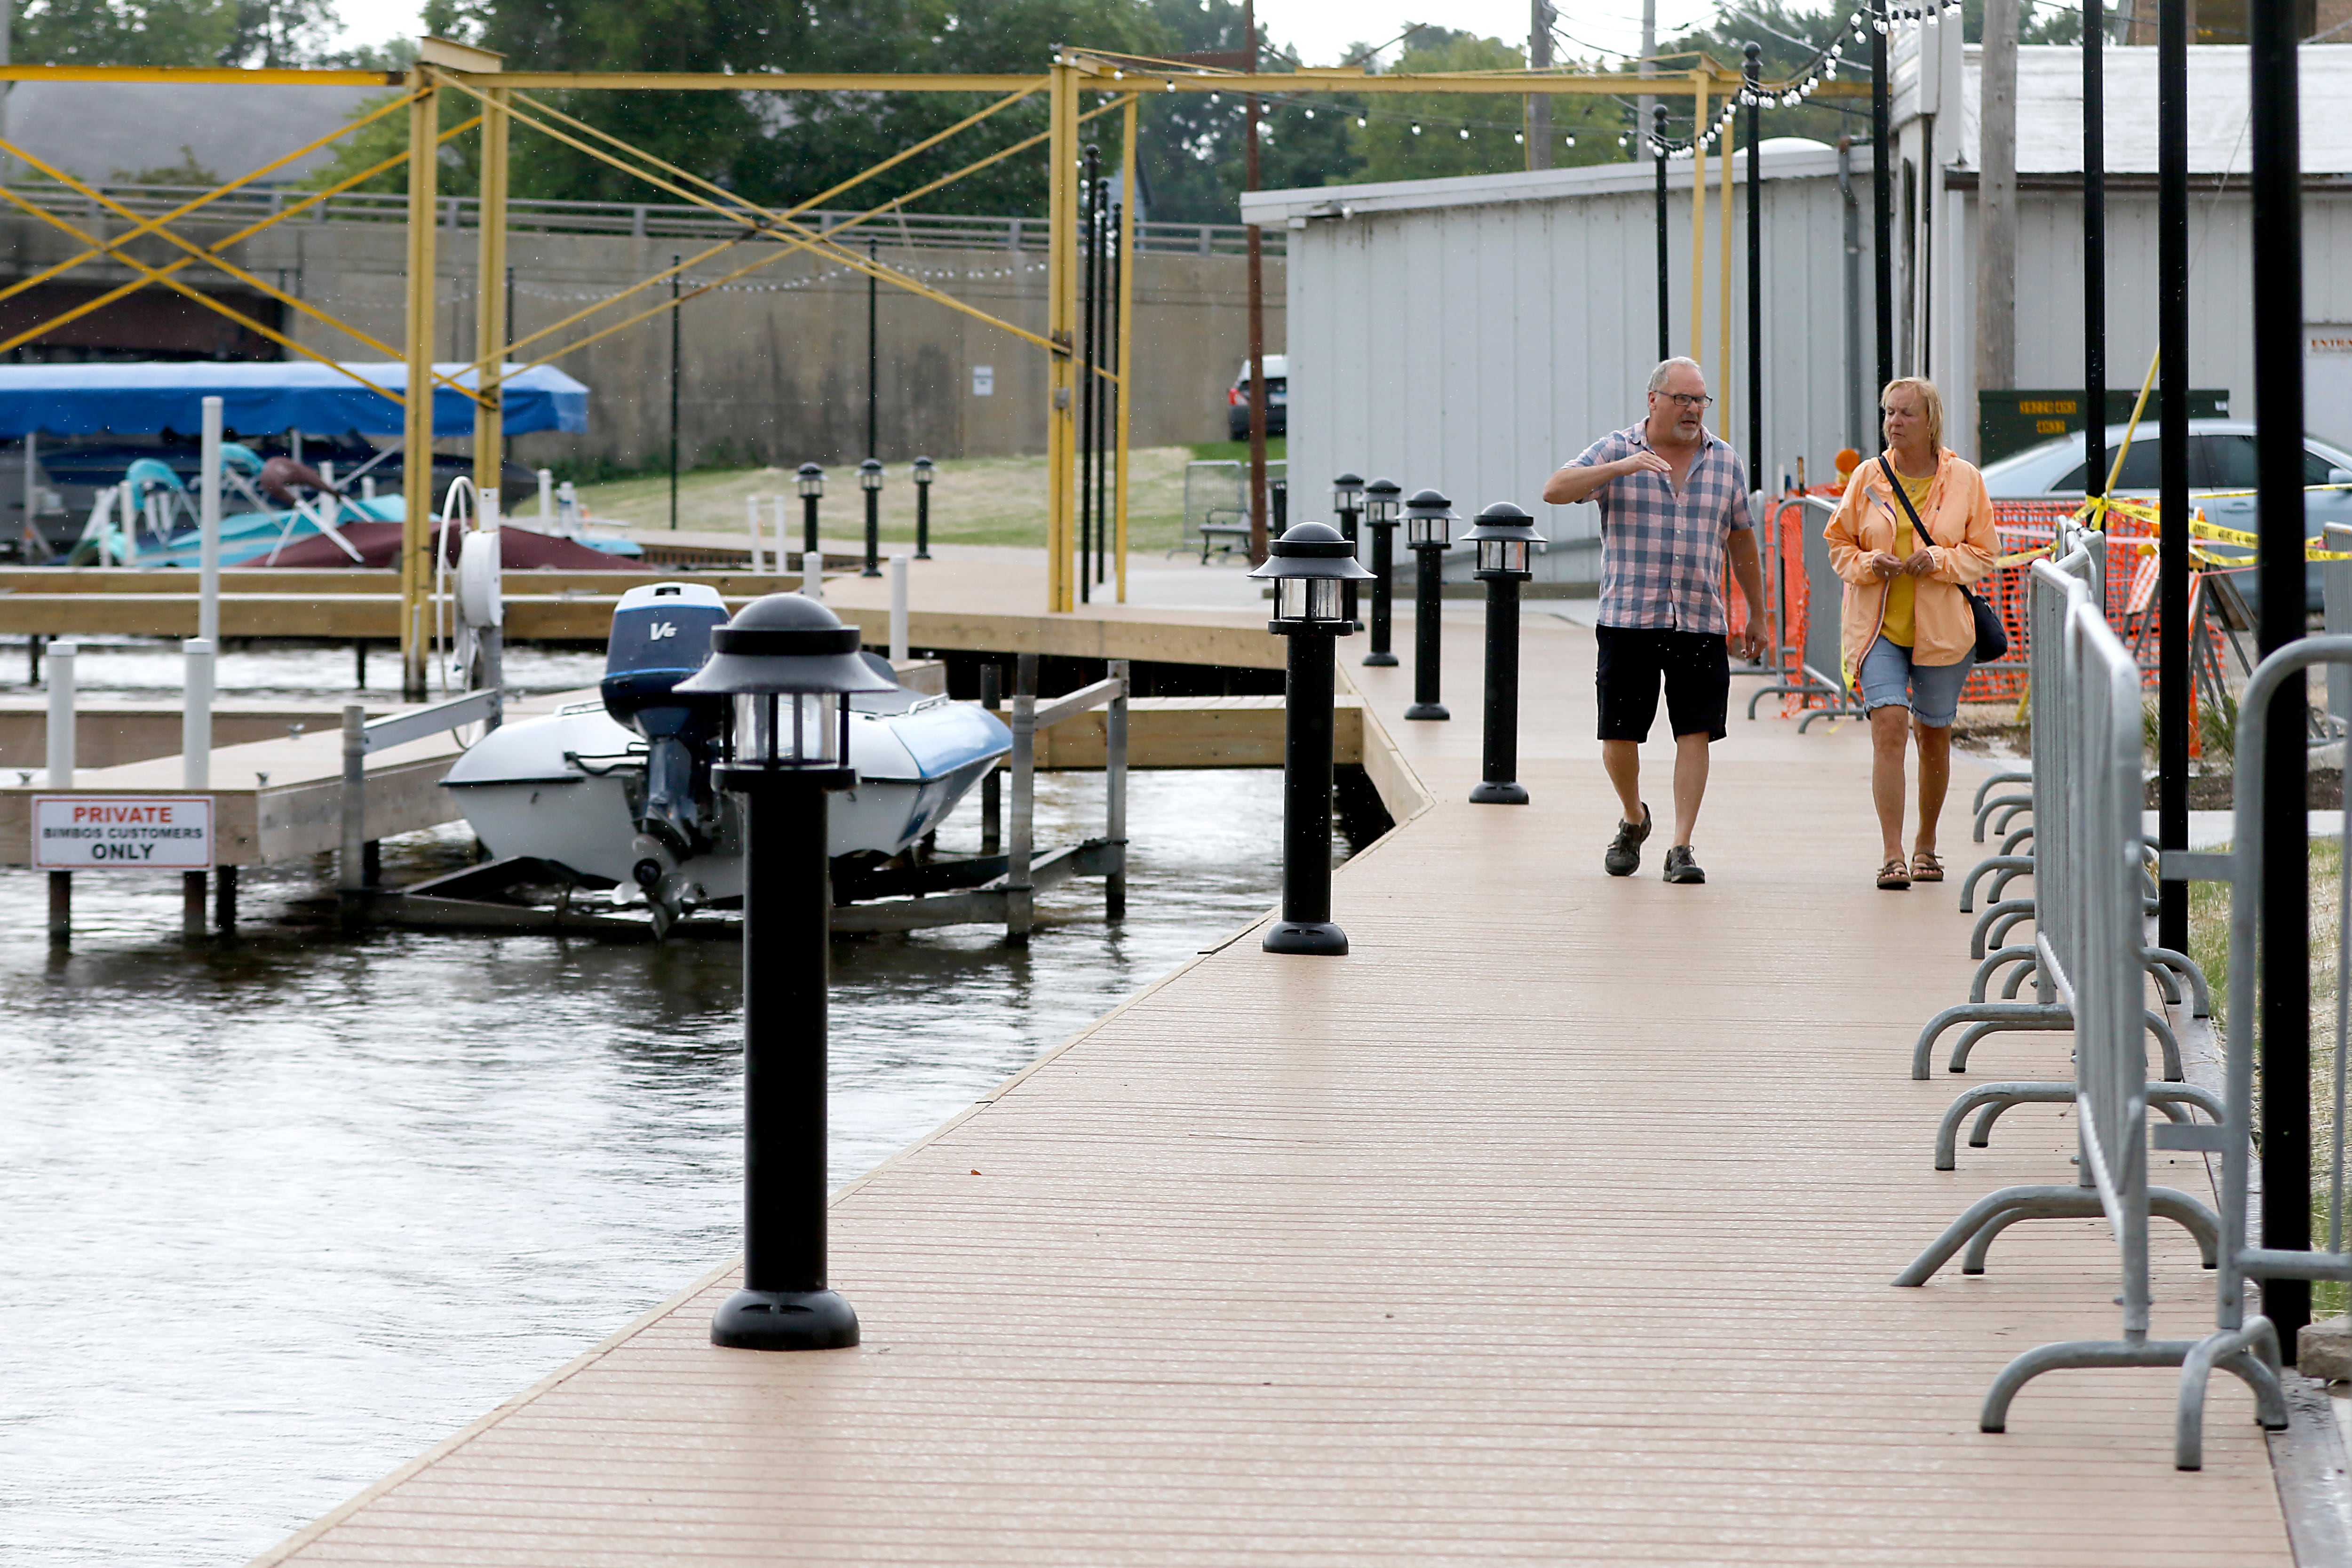 McHenry Riverwalk: New section connects downtown districts – with hopes to extend it farther